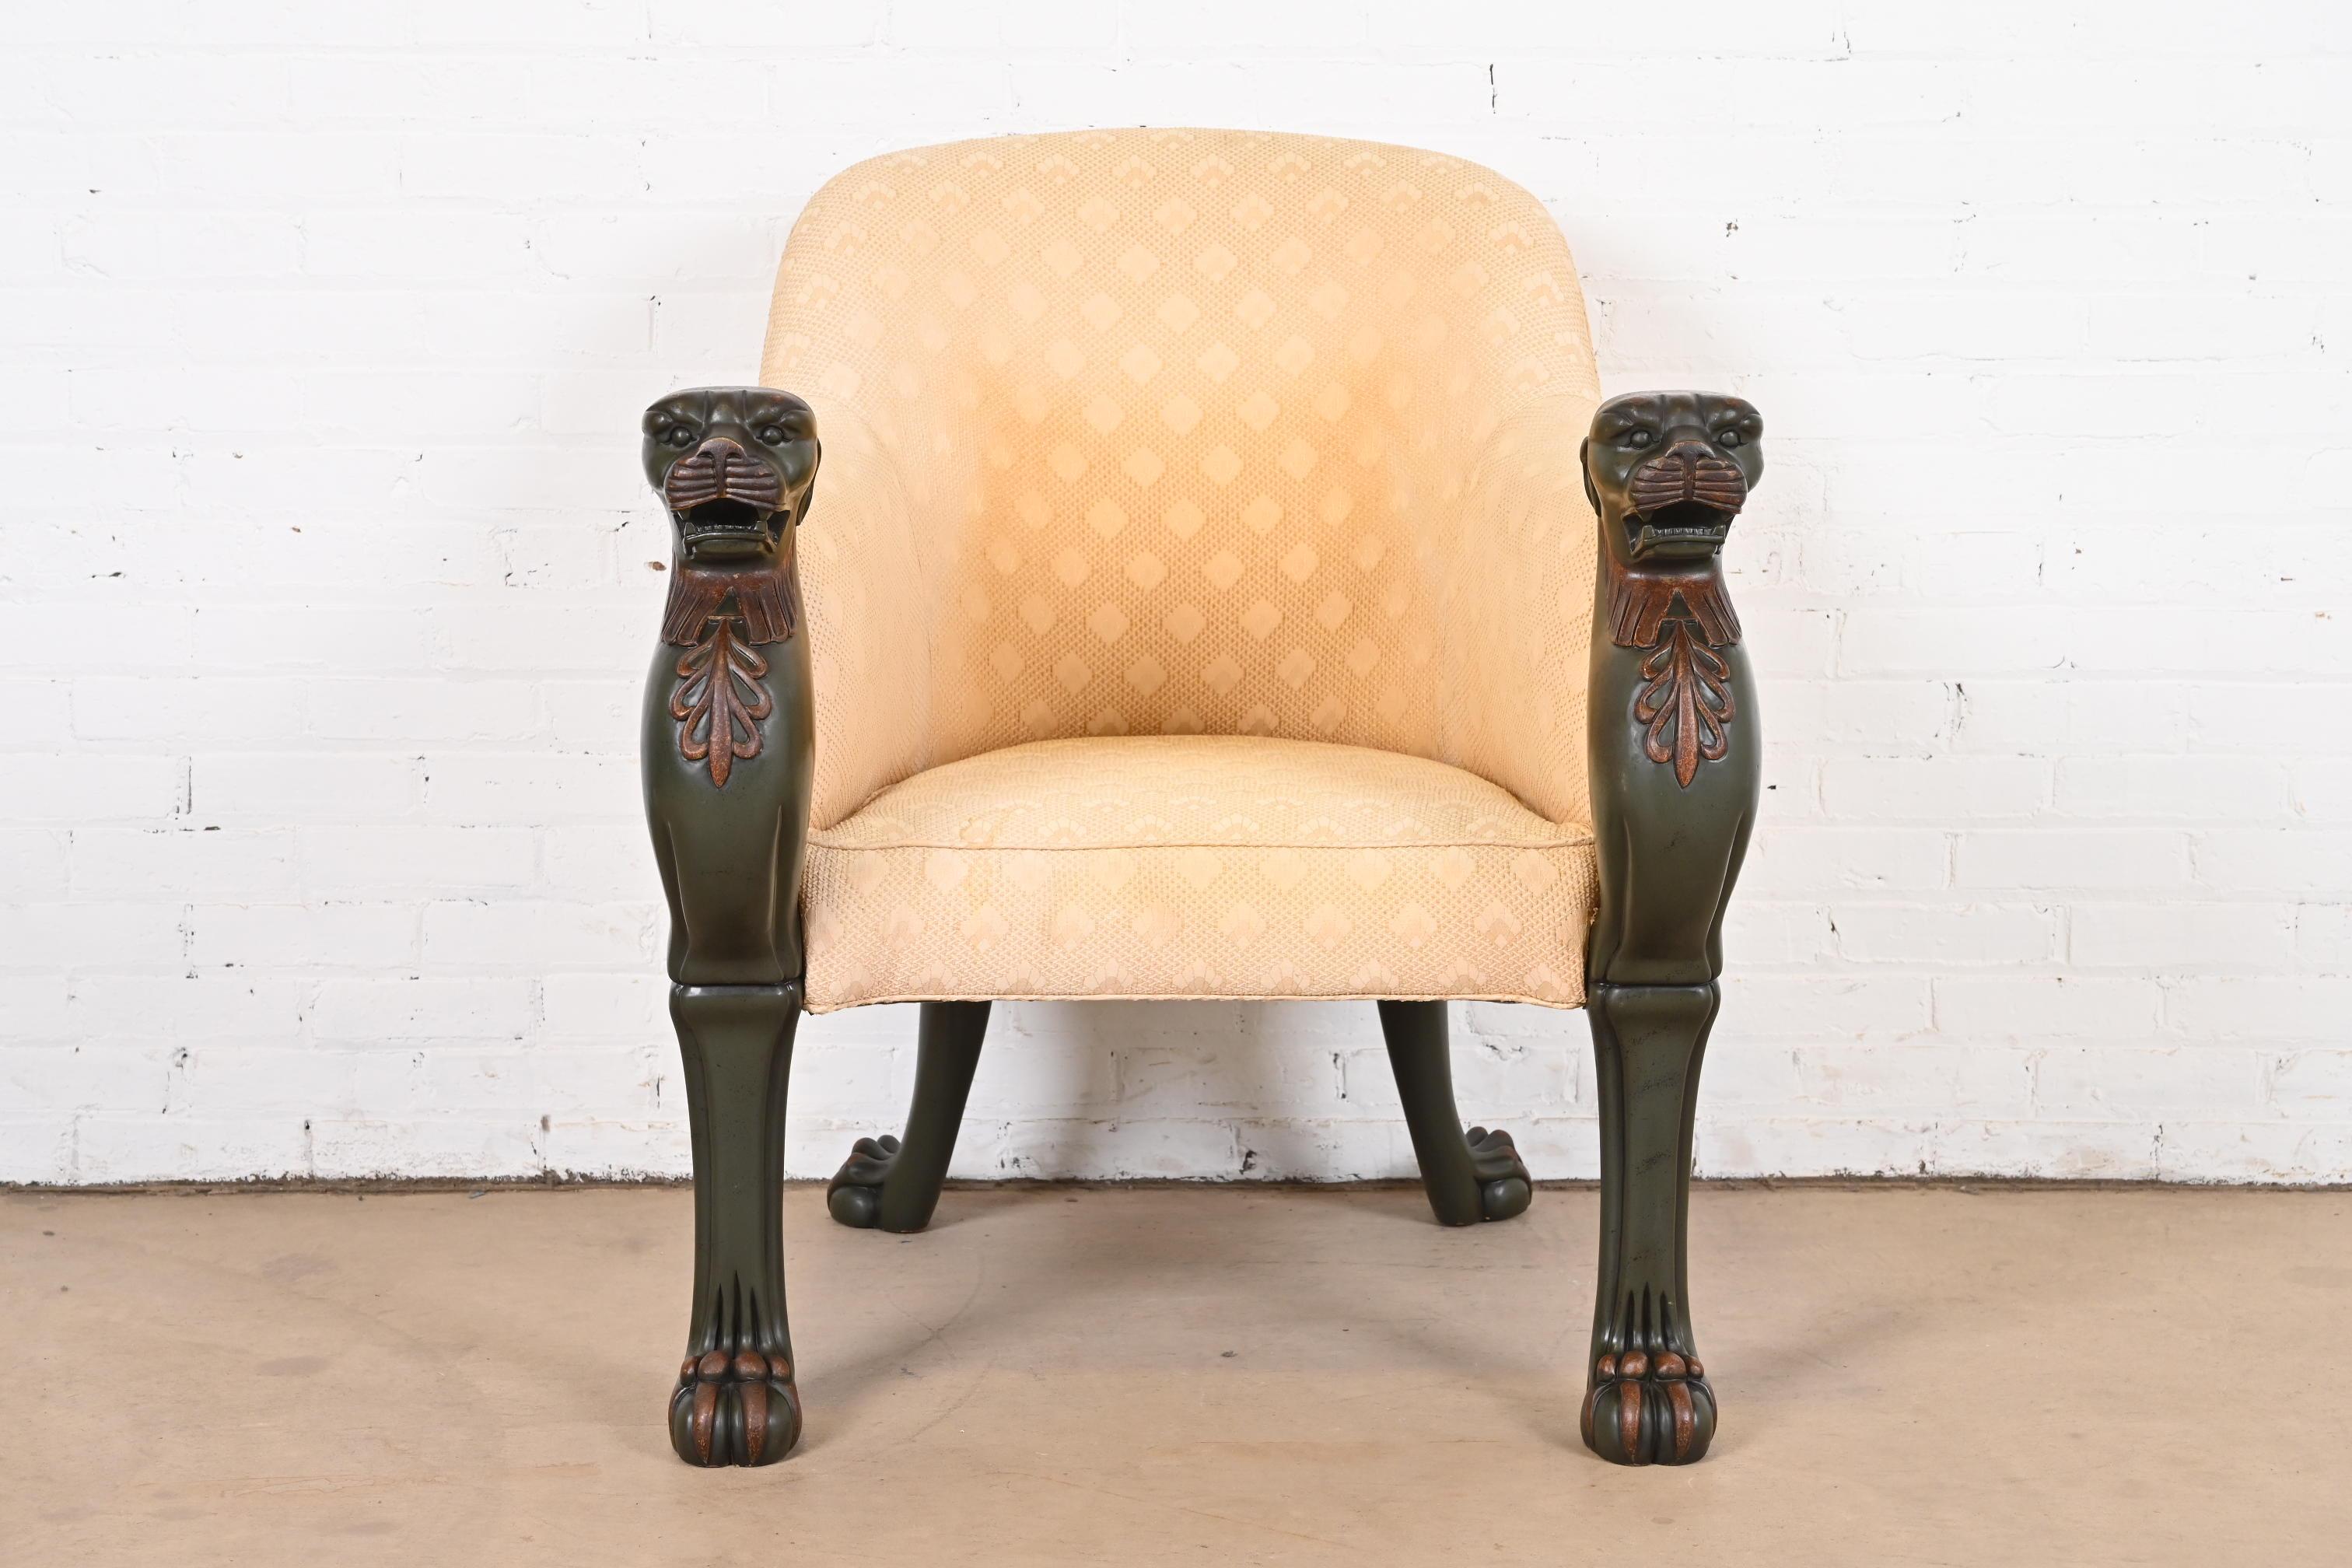 An outstanding Regency upholstered tub chair in the Egyptian style decorated in deep vert-de-bronze green and gilt. Elaborately hand-carved leopard masks continuing into lifelike clawed and padded feet. Giltwood manes and other decorated accents.